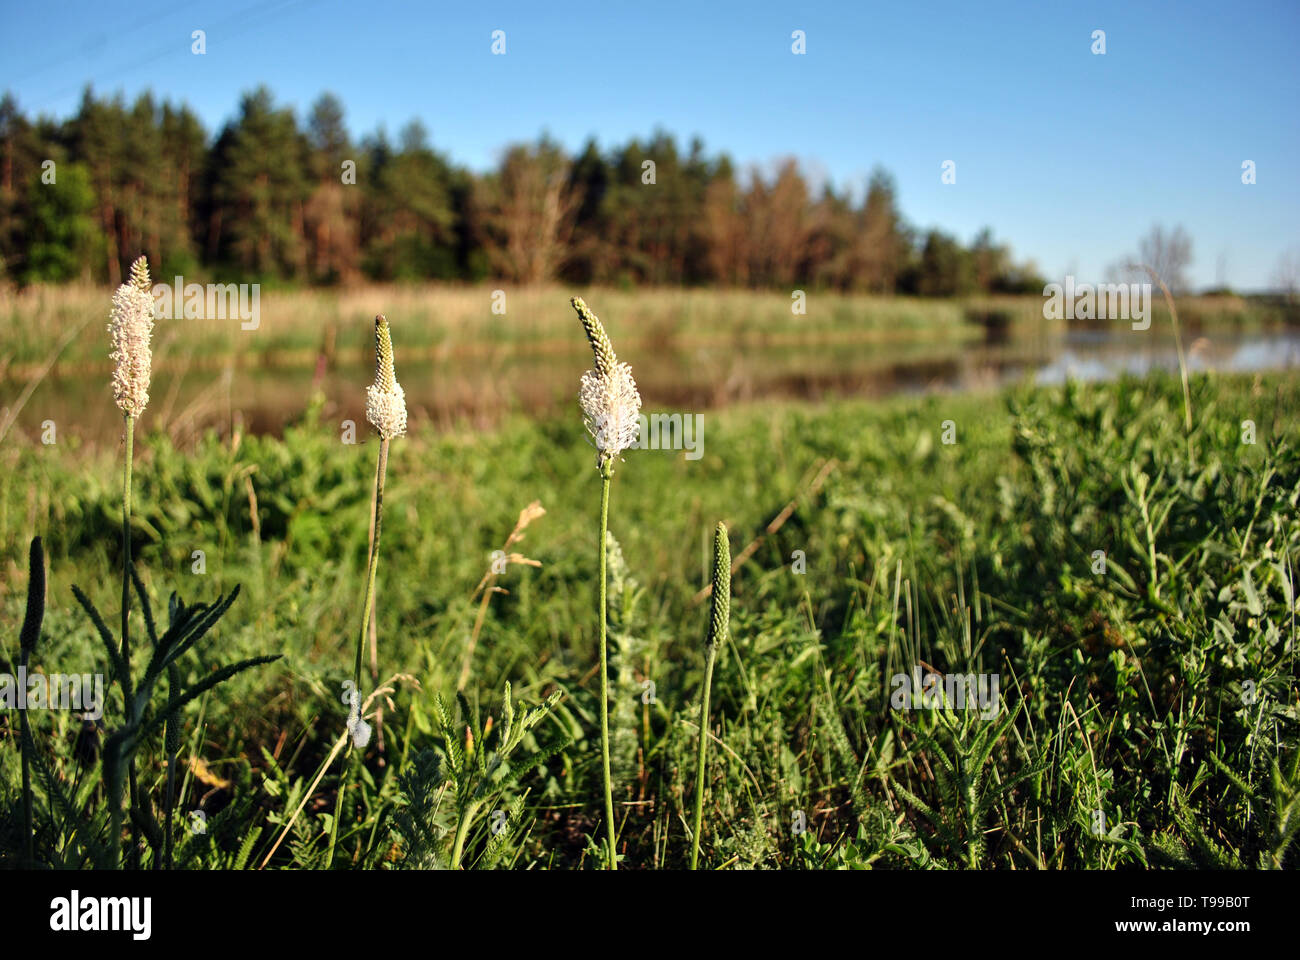 White greater plantain or fleaworts (Plantago major) plant flowers blooming on blurry landscape background, glade, river, wood and blue sky Stock Photo